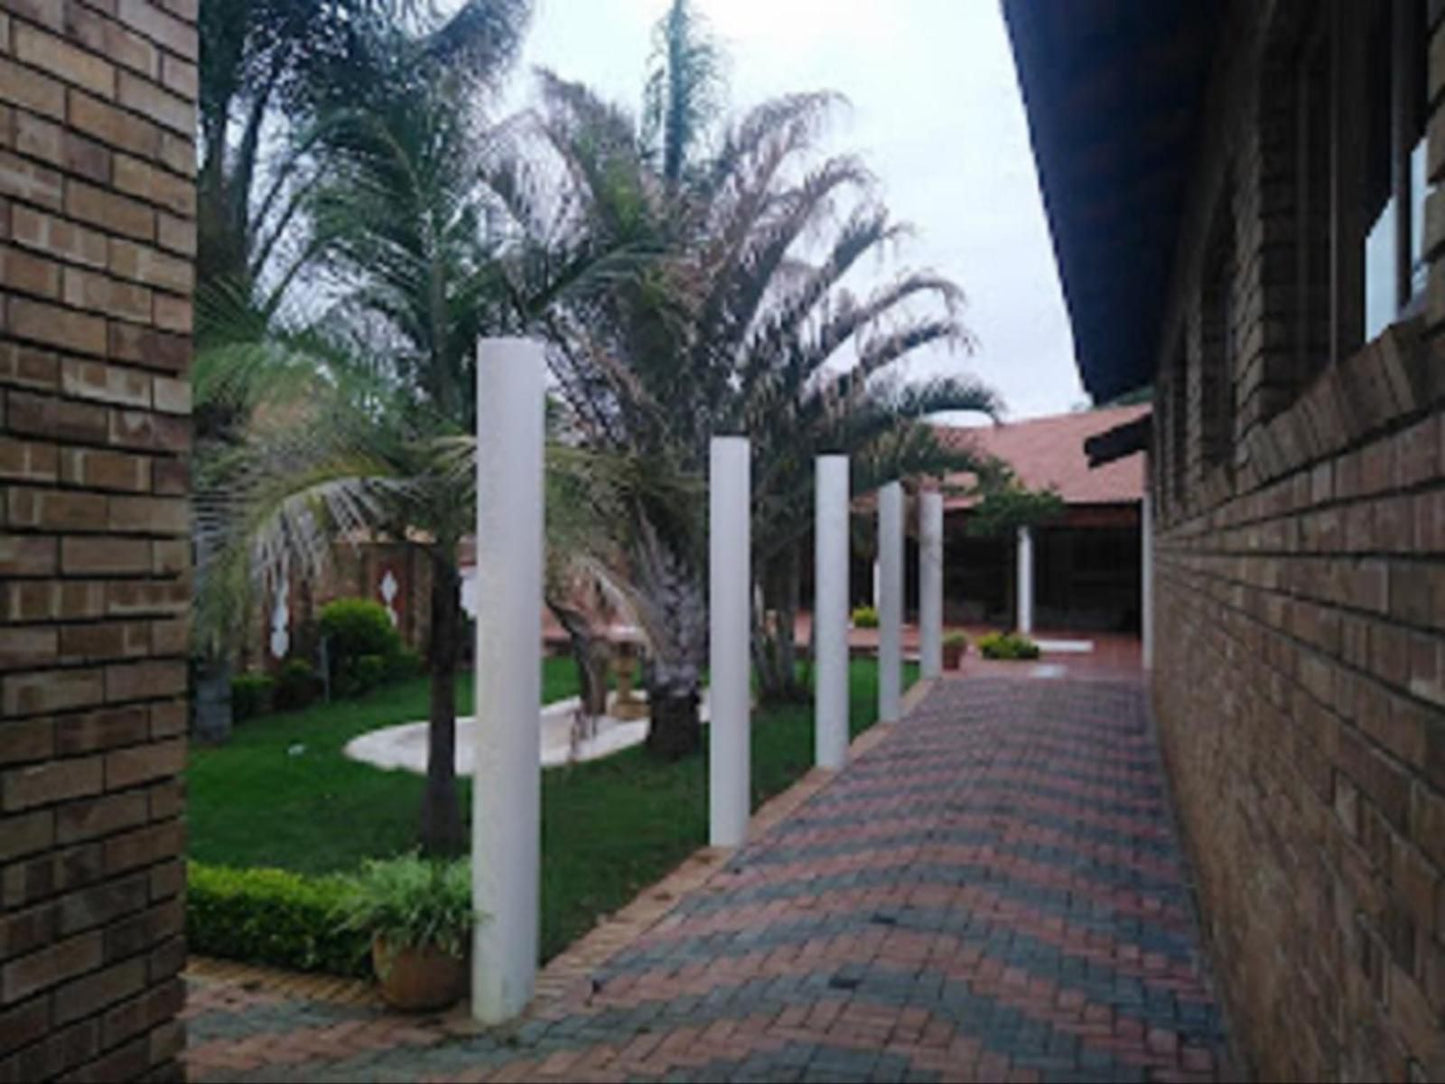 Silver Exclusive Lodge Dalmada Polokwane Pietersburg Limpopo Province South Africa Palm Tree, Plant, Nature, Wood